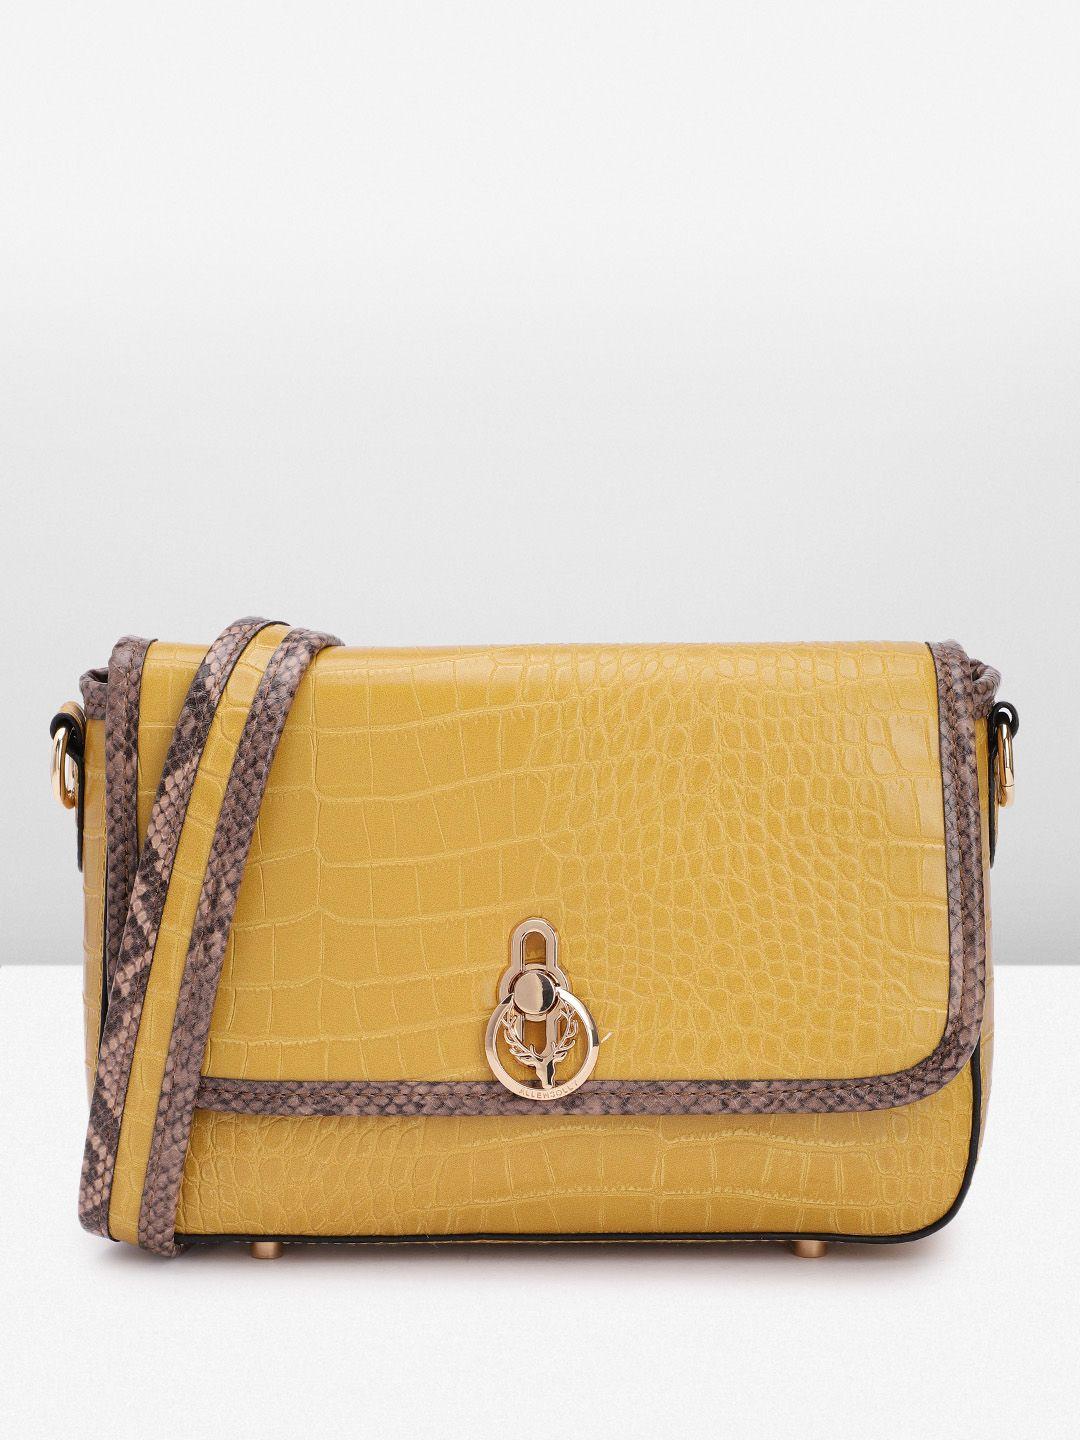 allen solly crocodile textured structured sling bag with contrast side taping detail